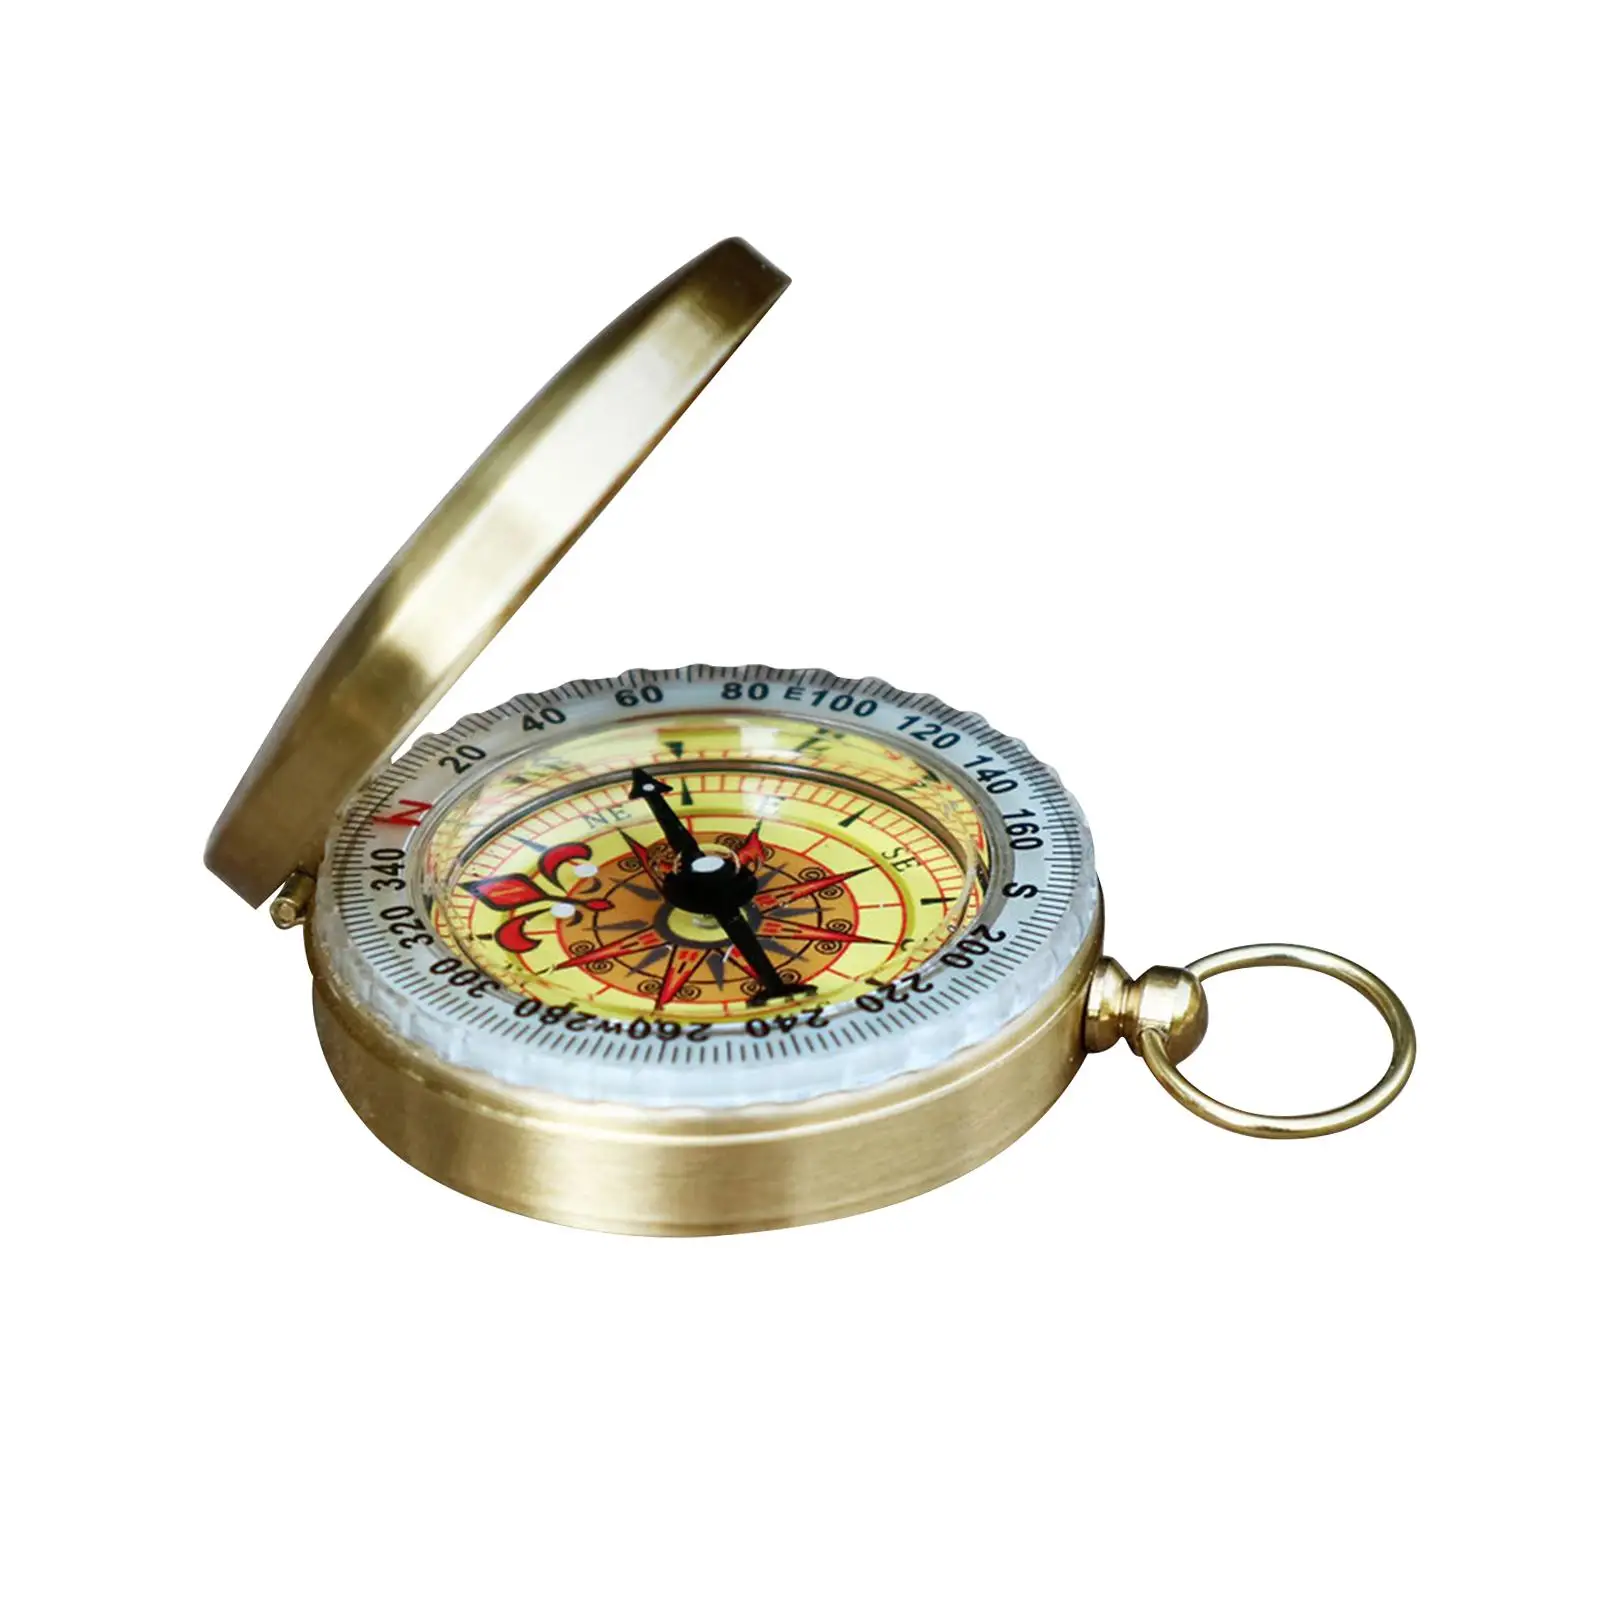 Outdoor Camping Mini Survival Luminous Compass Glow in The Dark Classic Pocket Style Compass for Hiking Climbing Backpacking